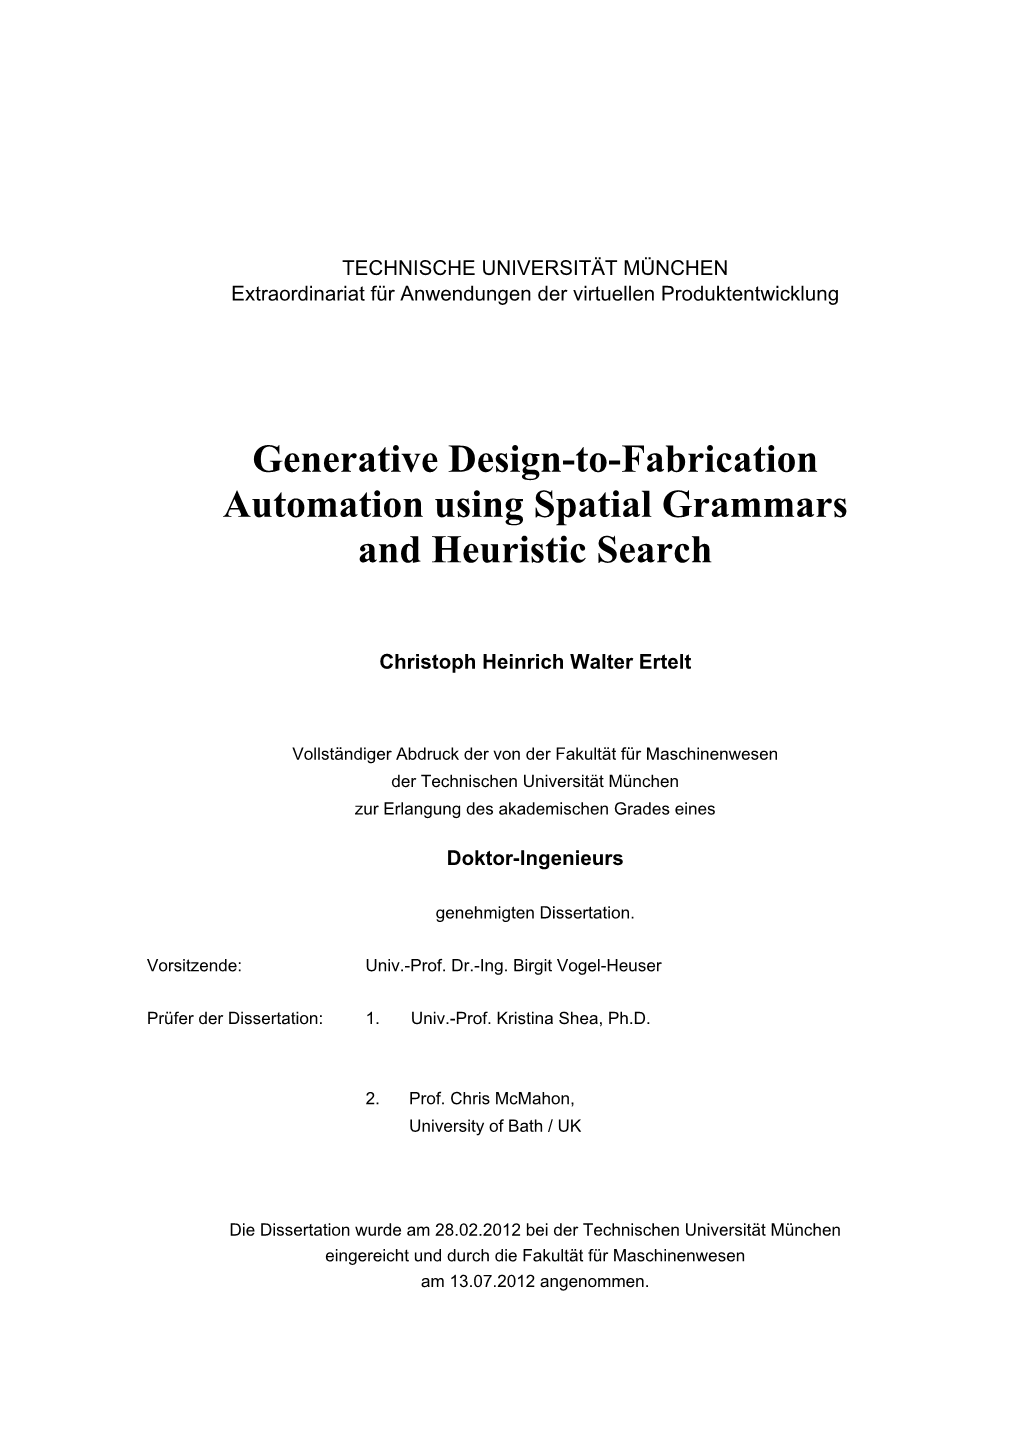 Generative Design-To-Fabrication Automation Using Spatial Grammars and Heuristic Search